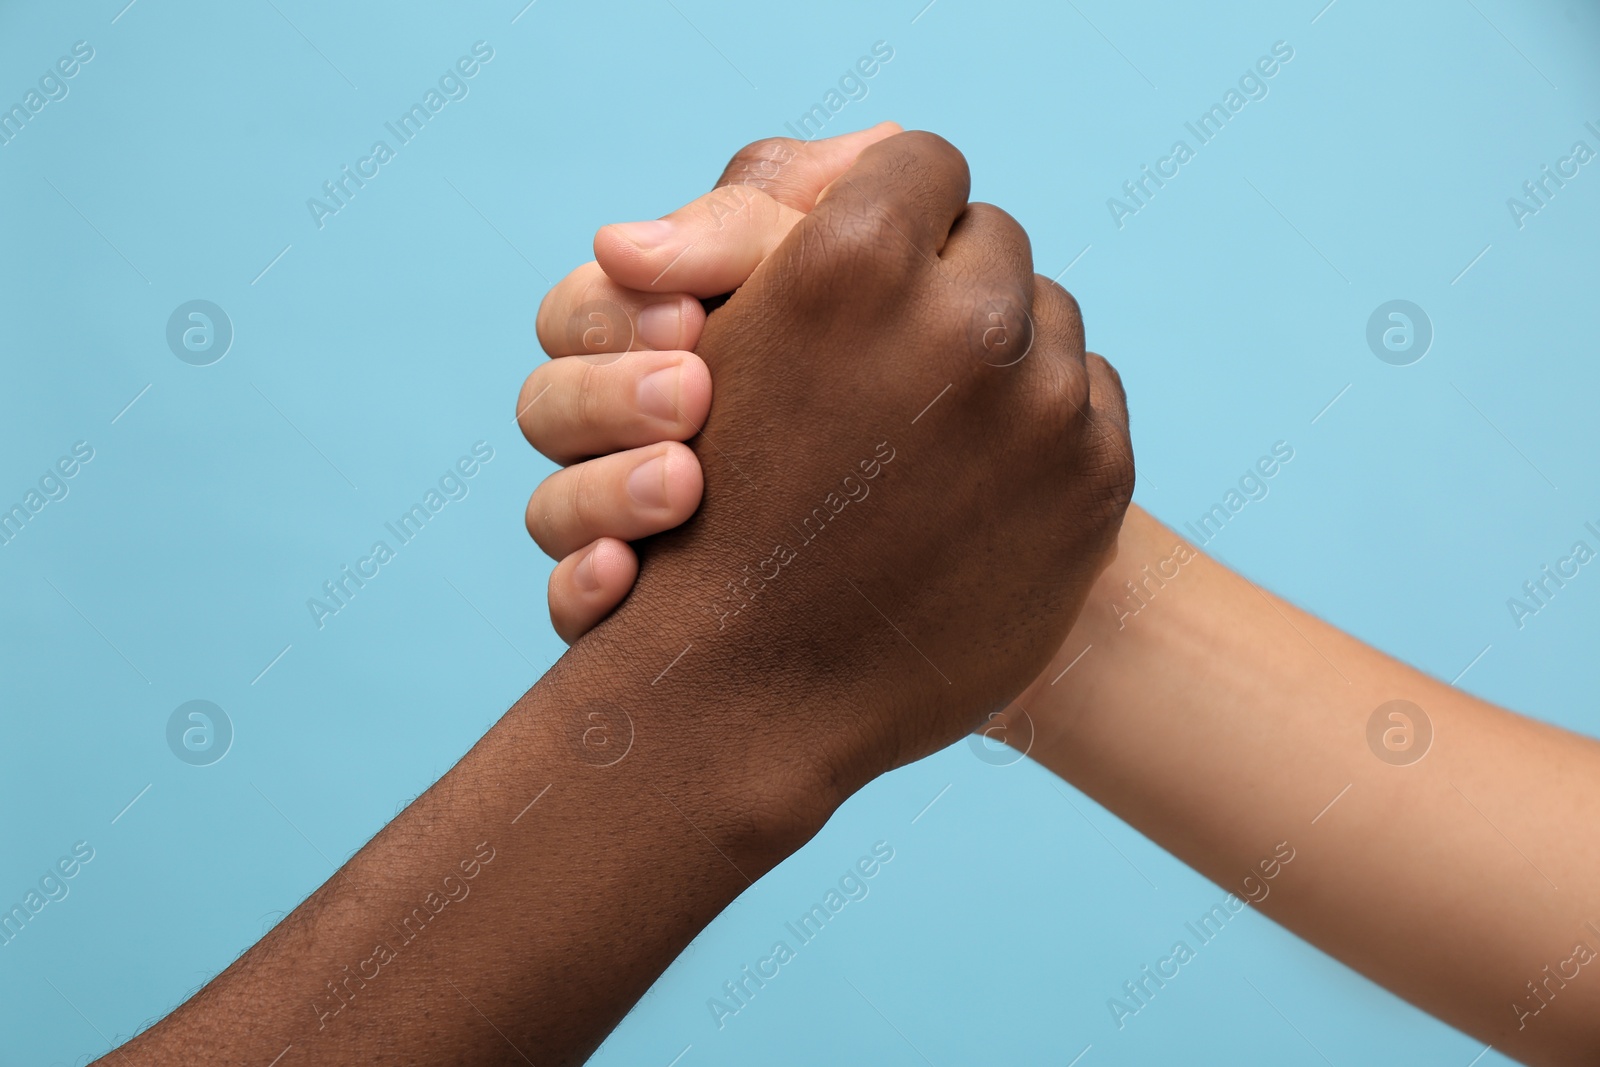 Photo of Men clasping hands on light blue background, closeup